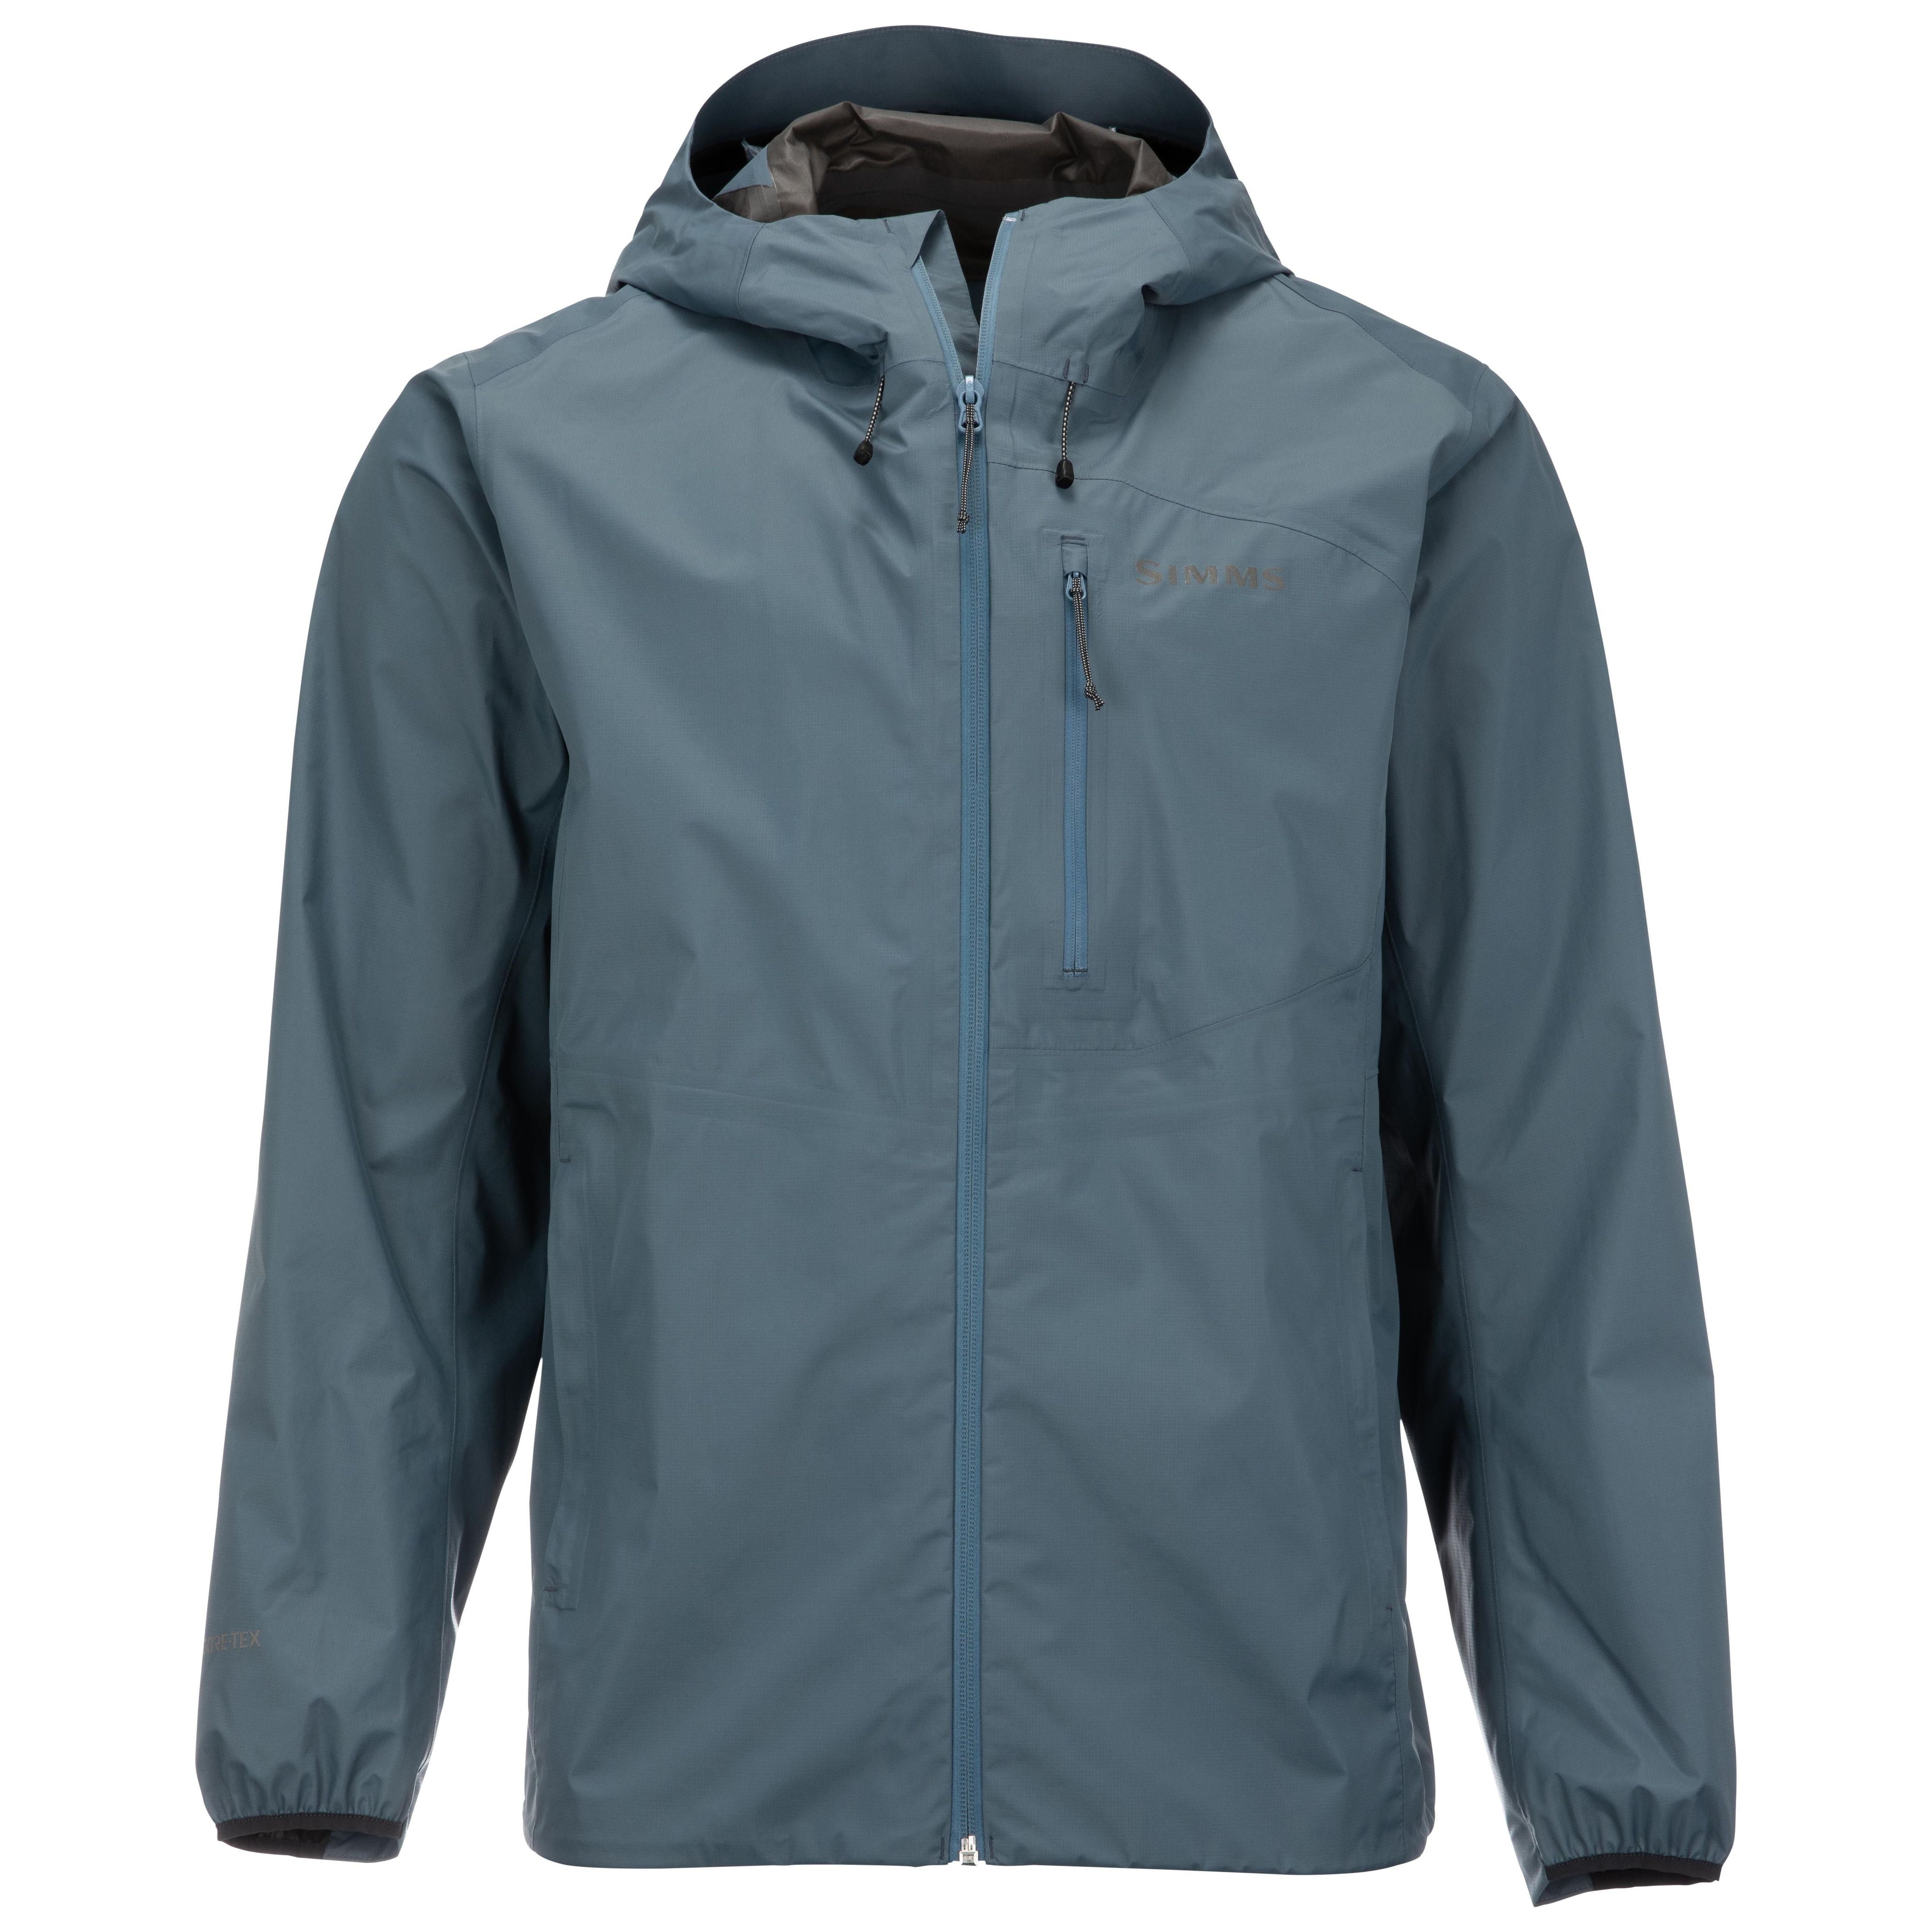 Outerwear – Tailwaters Fly Fishing